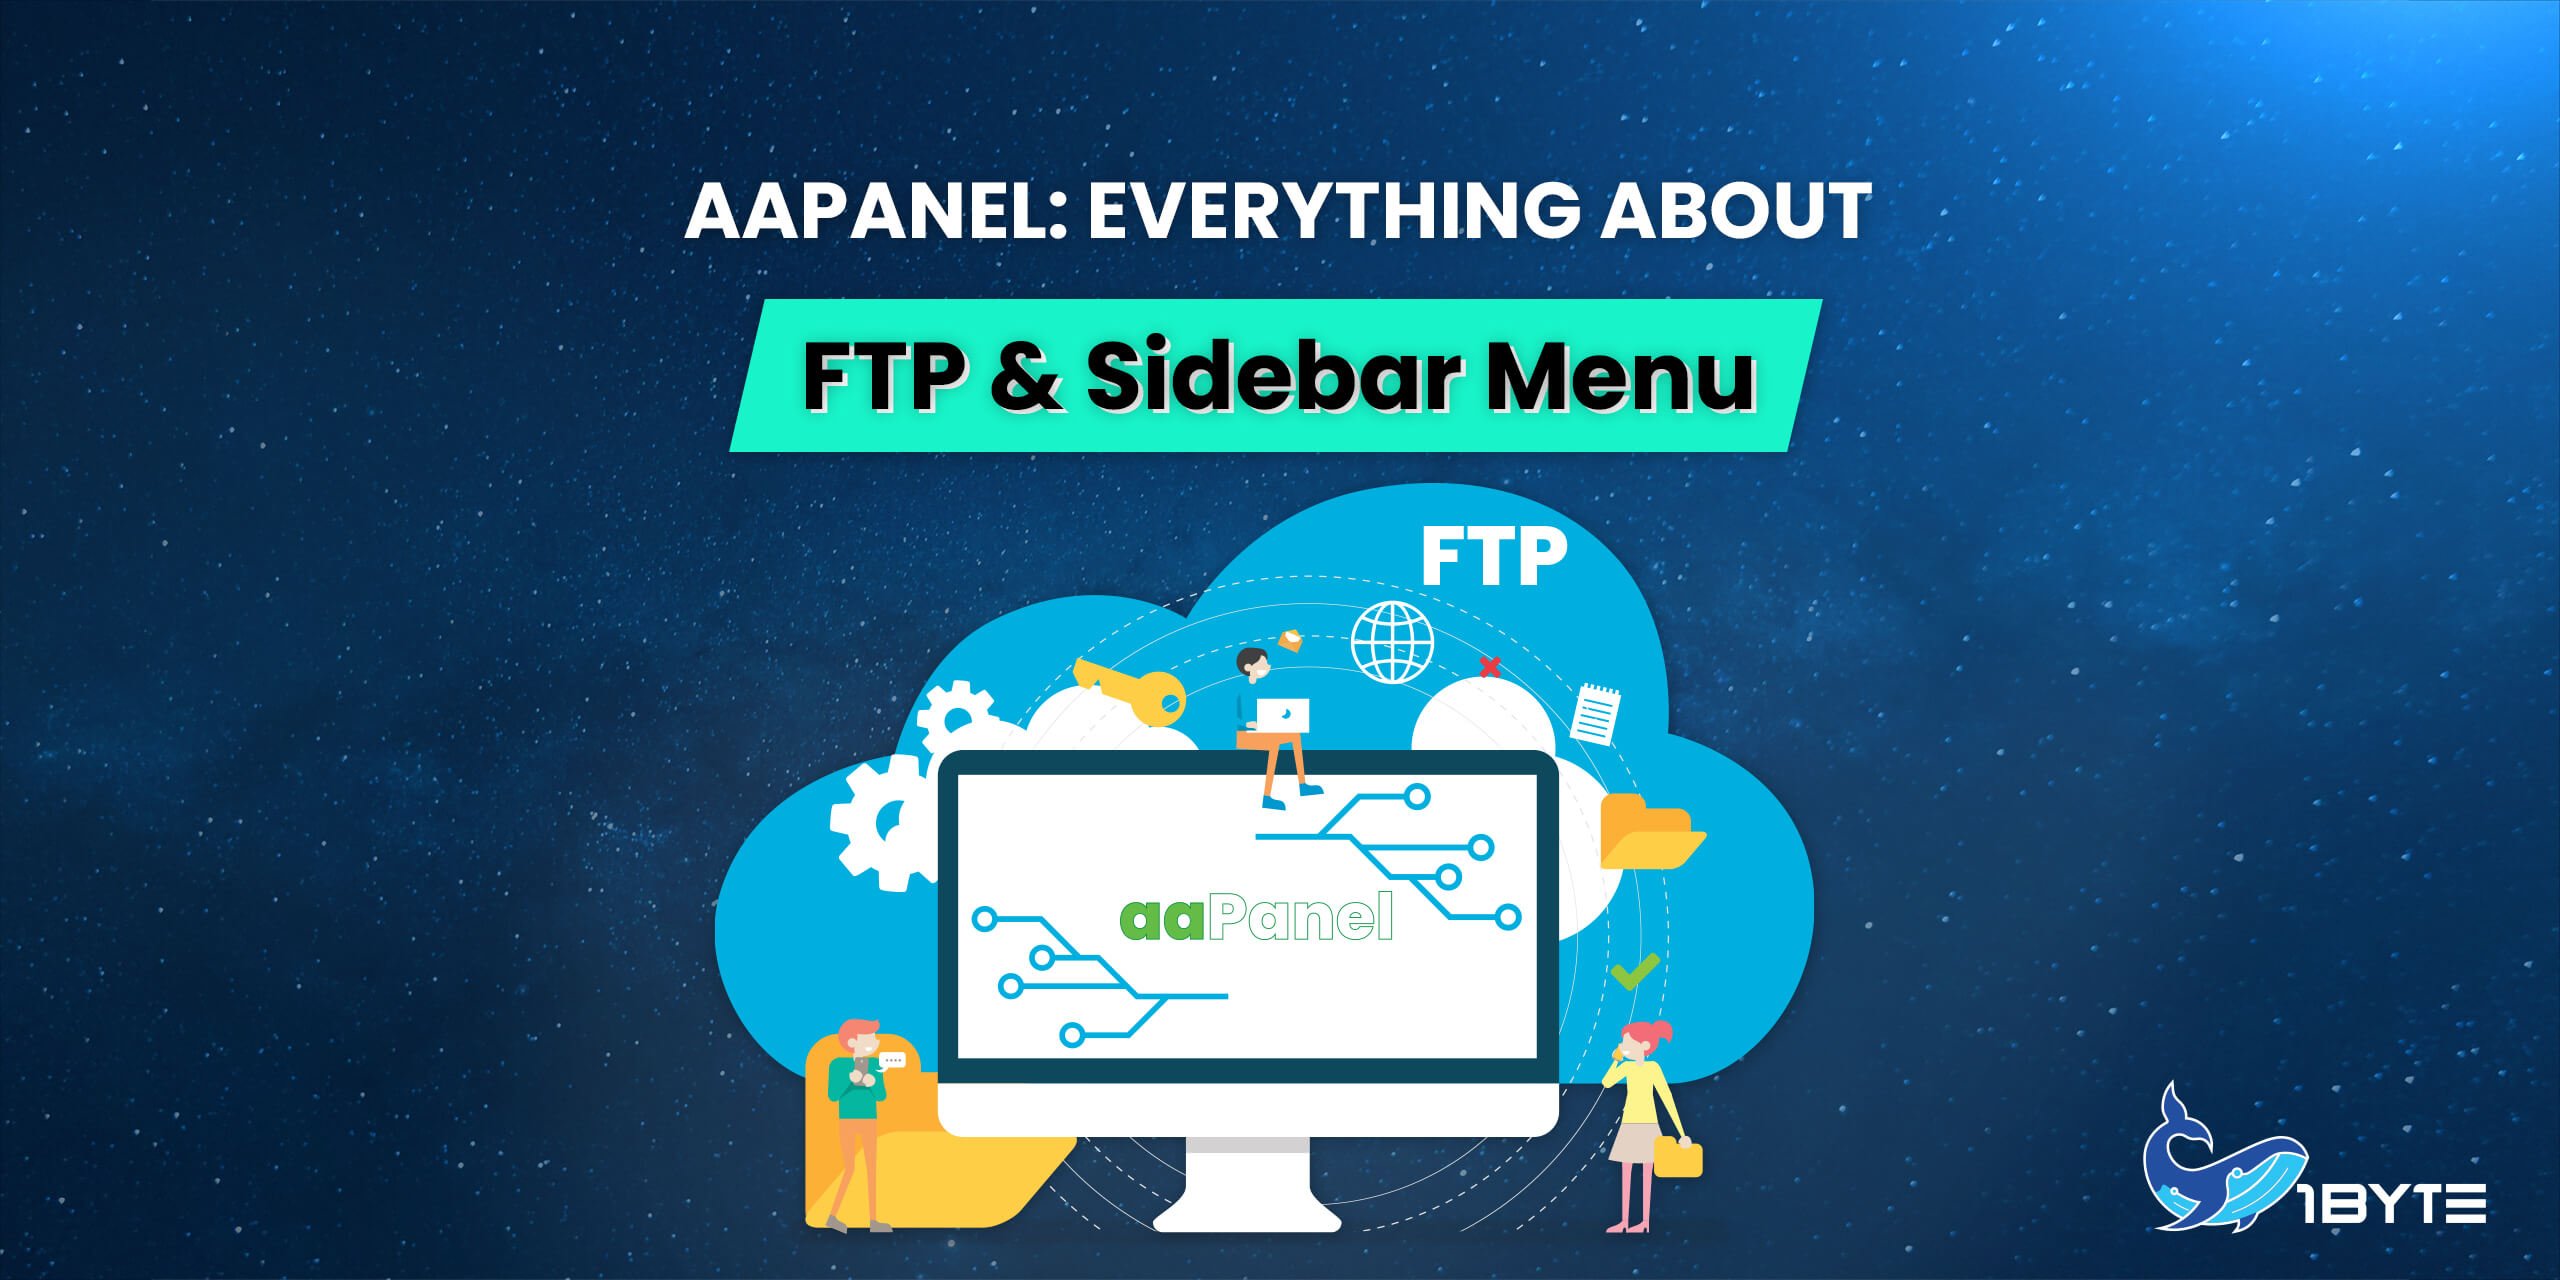 aaPanel FTP: How to Manage and Customize Sidebar Menu